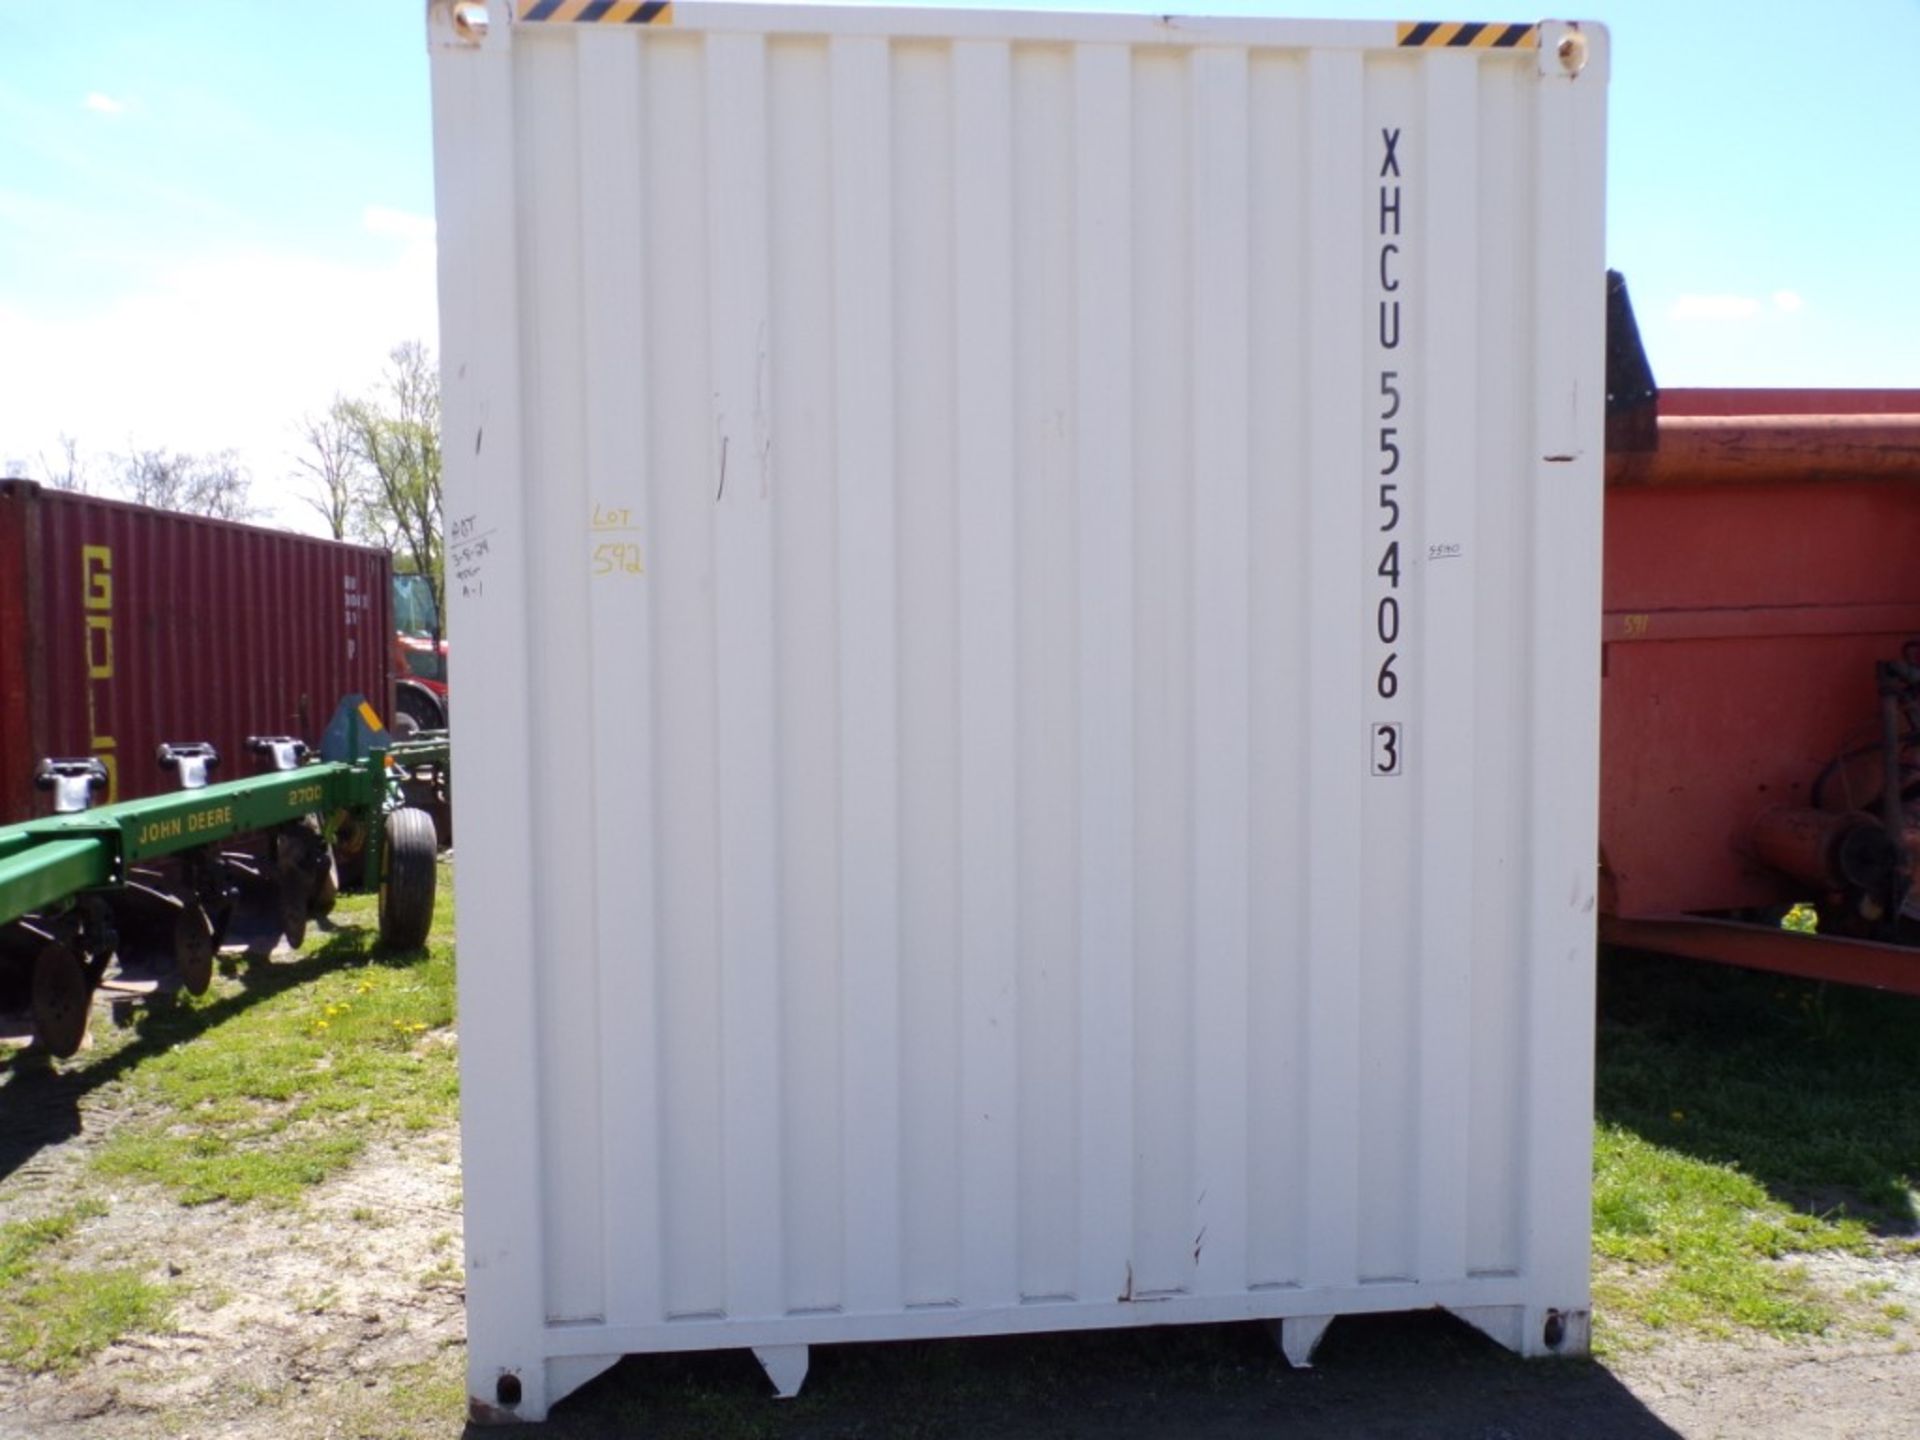 New 40' Shipping/Storage Container, 4 Side Entrance Doors, Barn Doors on Rear, Cont. #